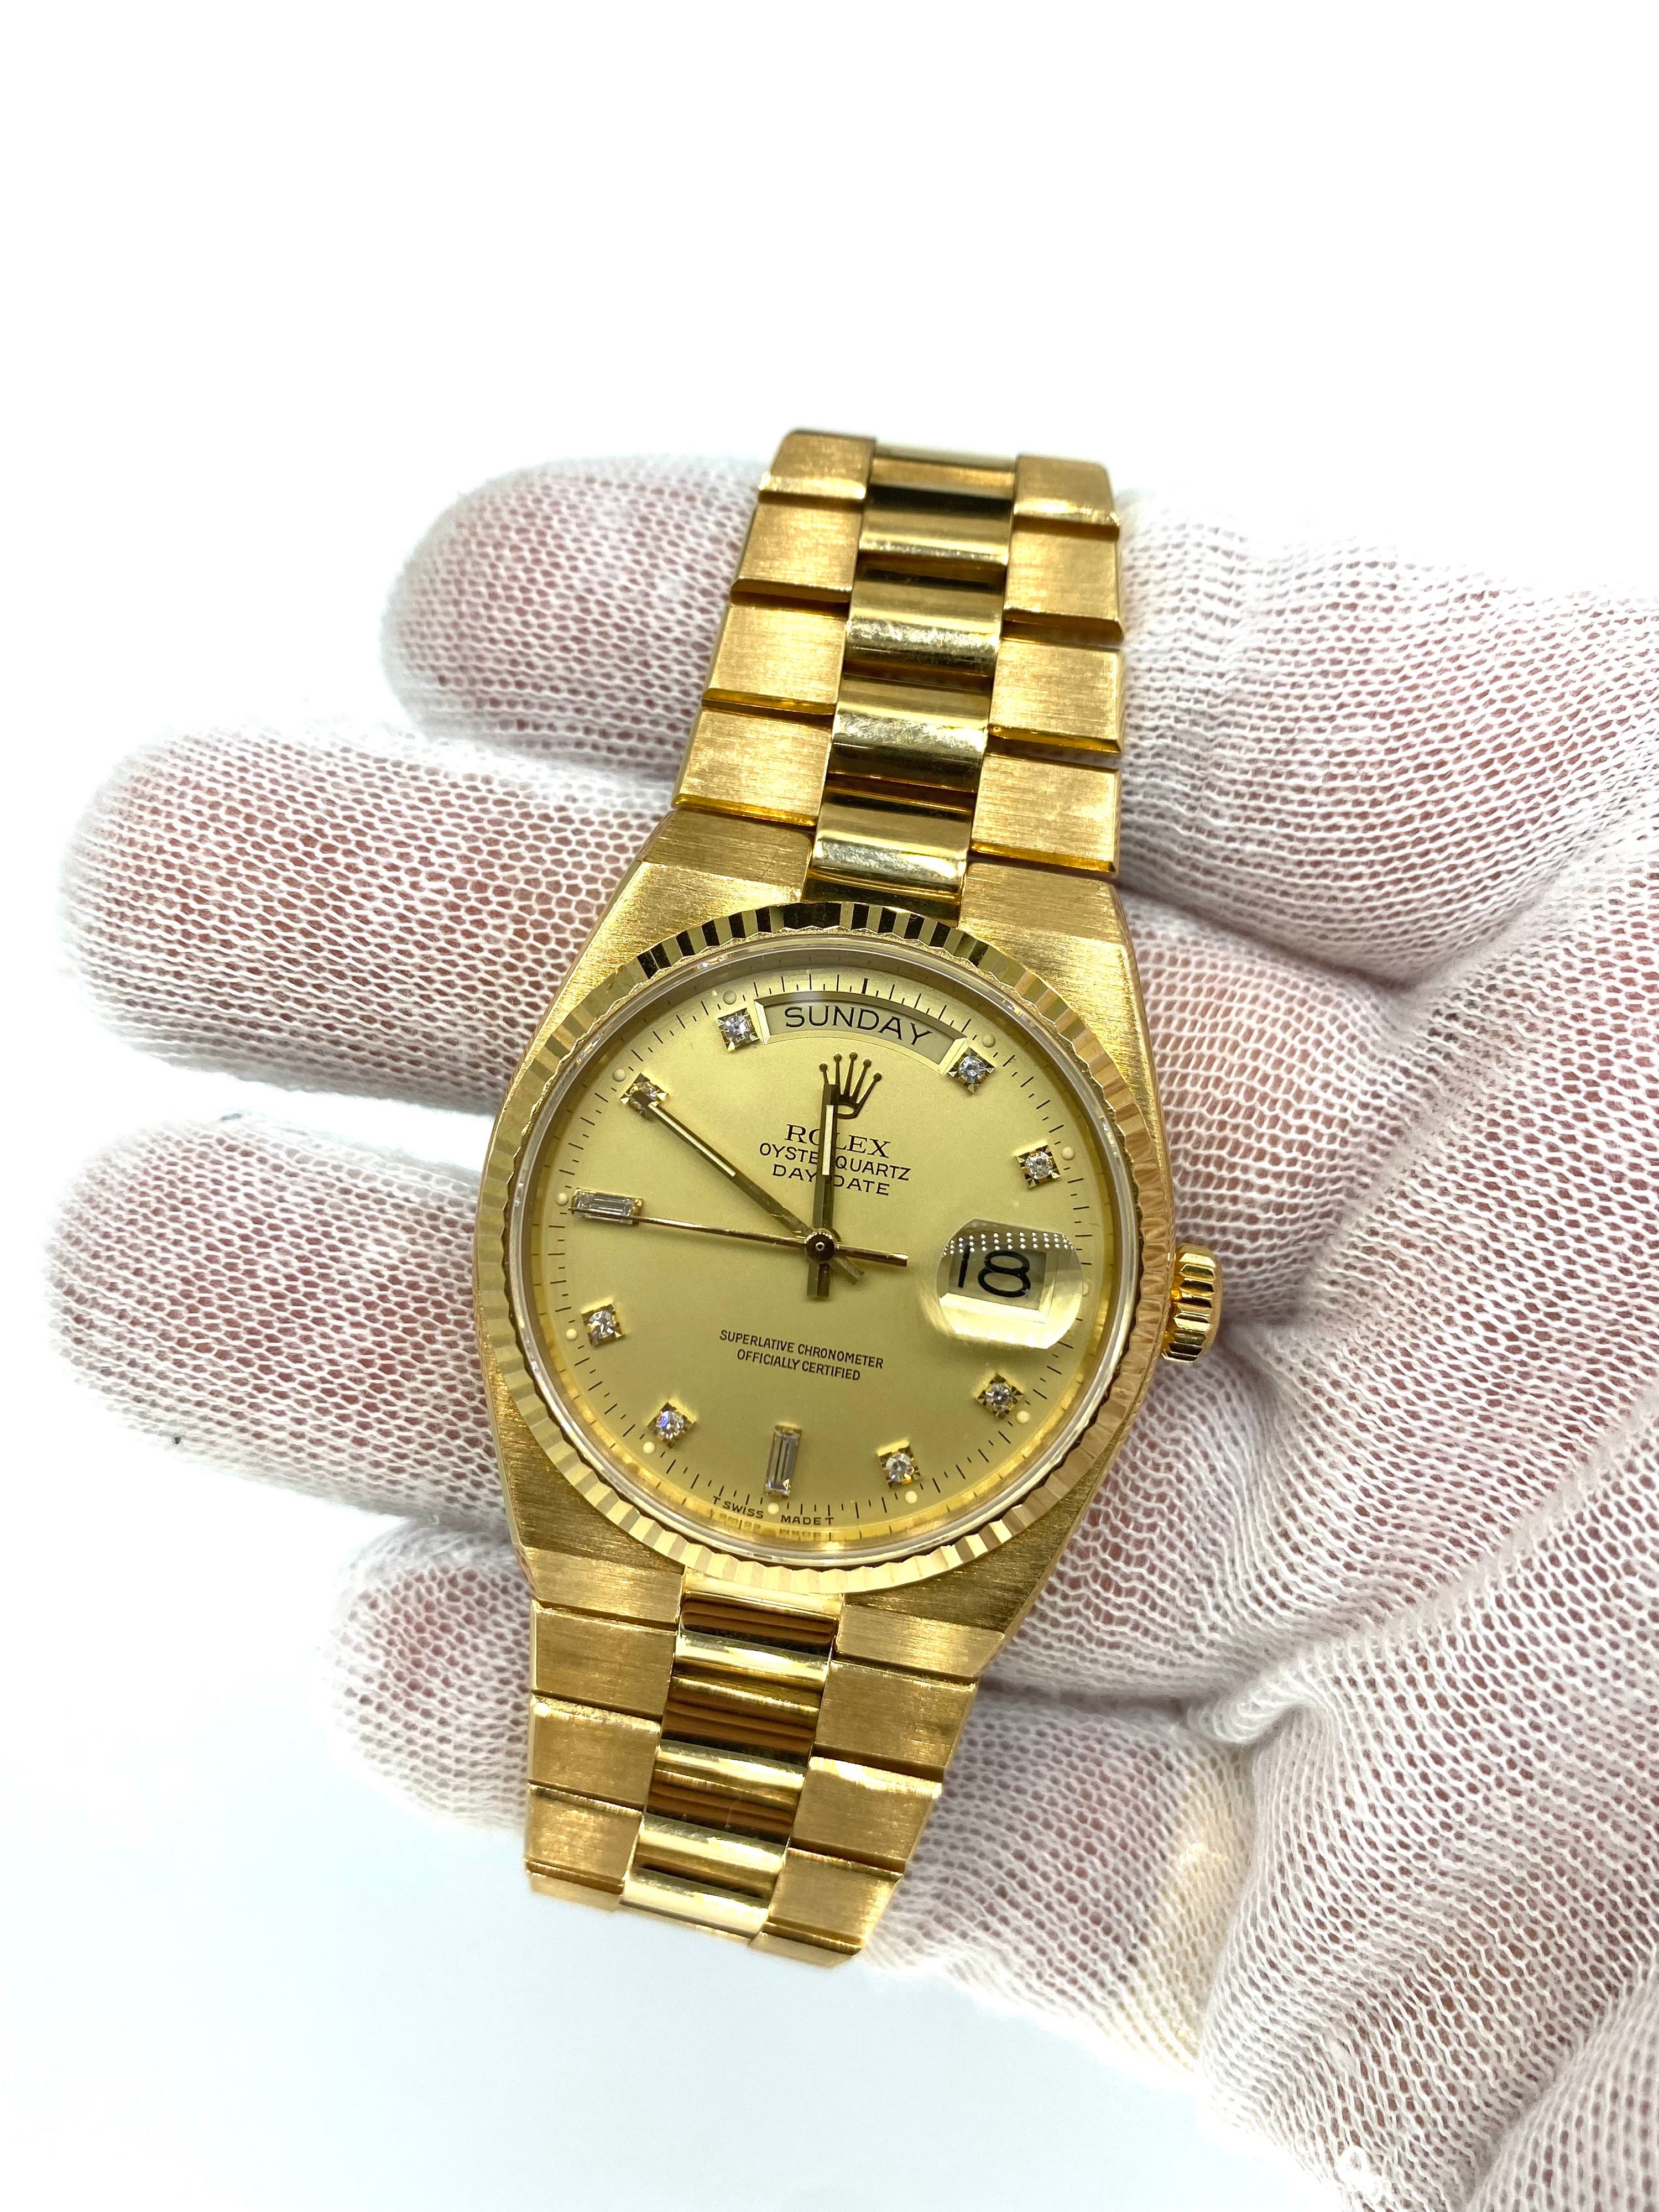 Vintage Rolex Day Date Original Diamond Dial 18k Solid Gold Mint Condition 1982 with box and papers. This Rolex watch is a true collectible to a Rolex lover. In mint condition with original diamond dial barely worn, was kept in a bank safe since the